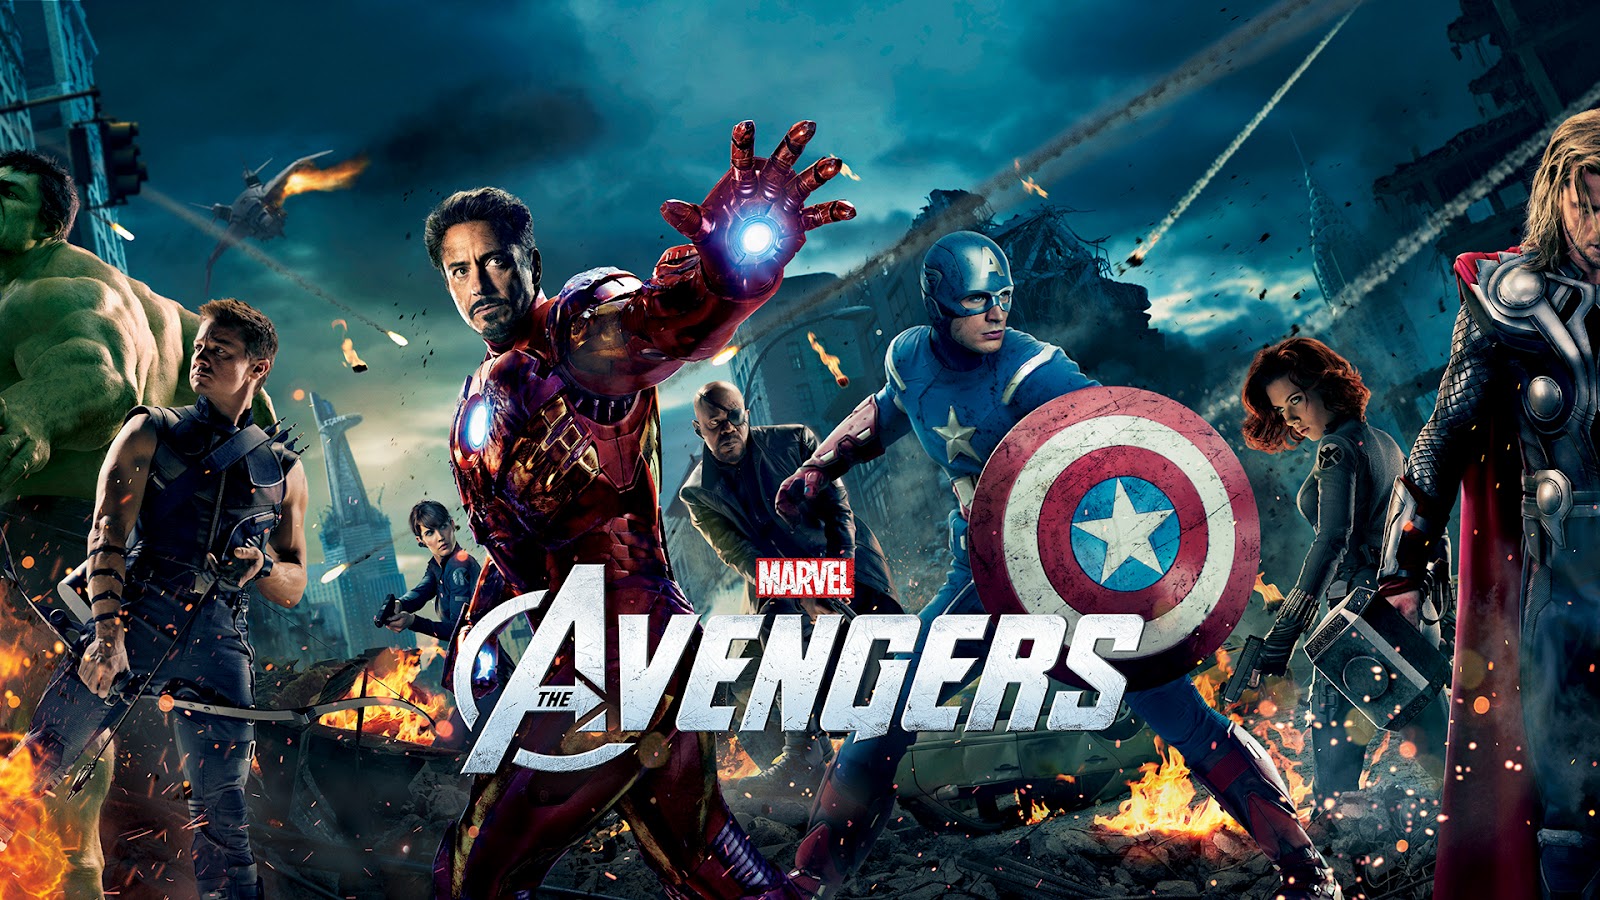 Free Hd Wallpapers The Avengers Hd Wallpapers